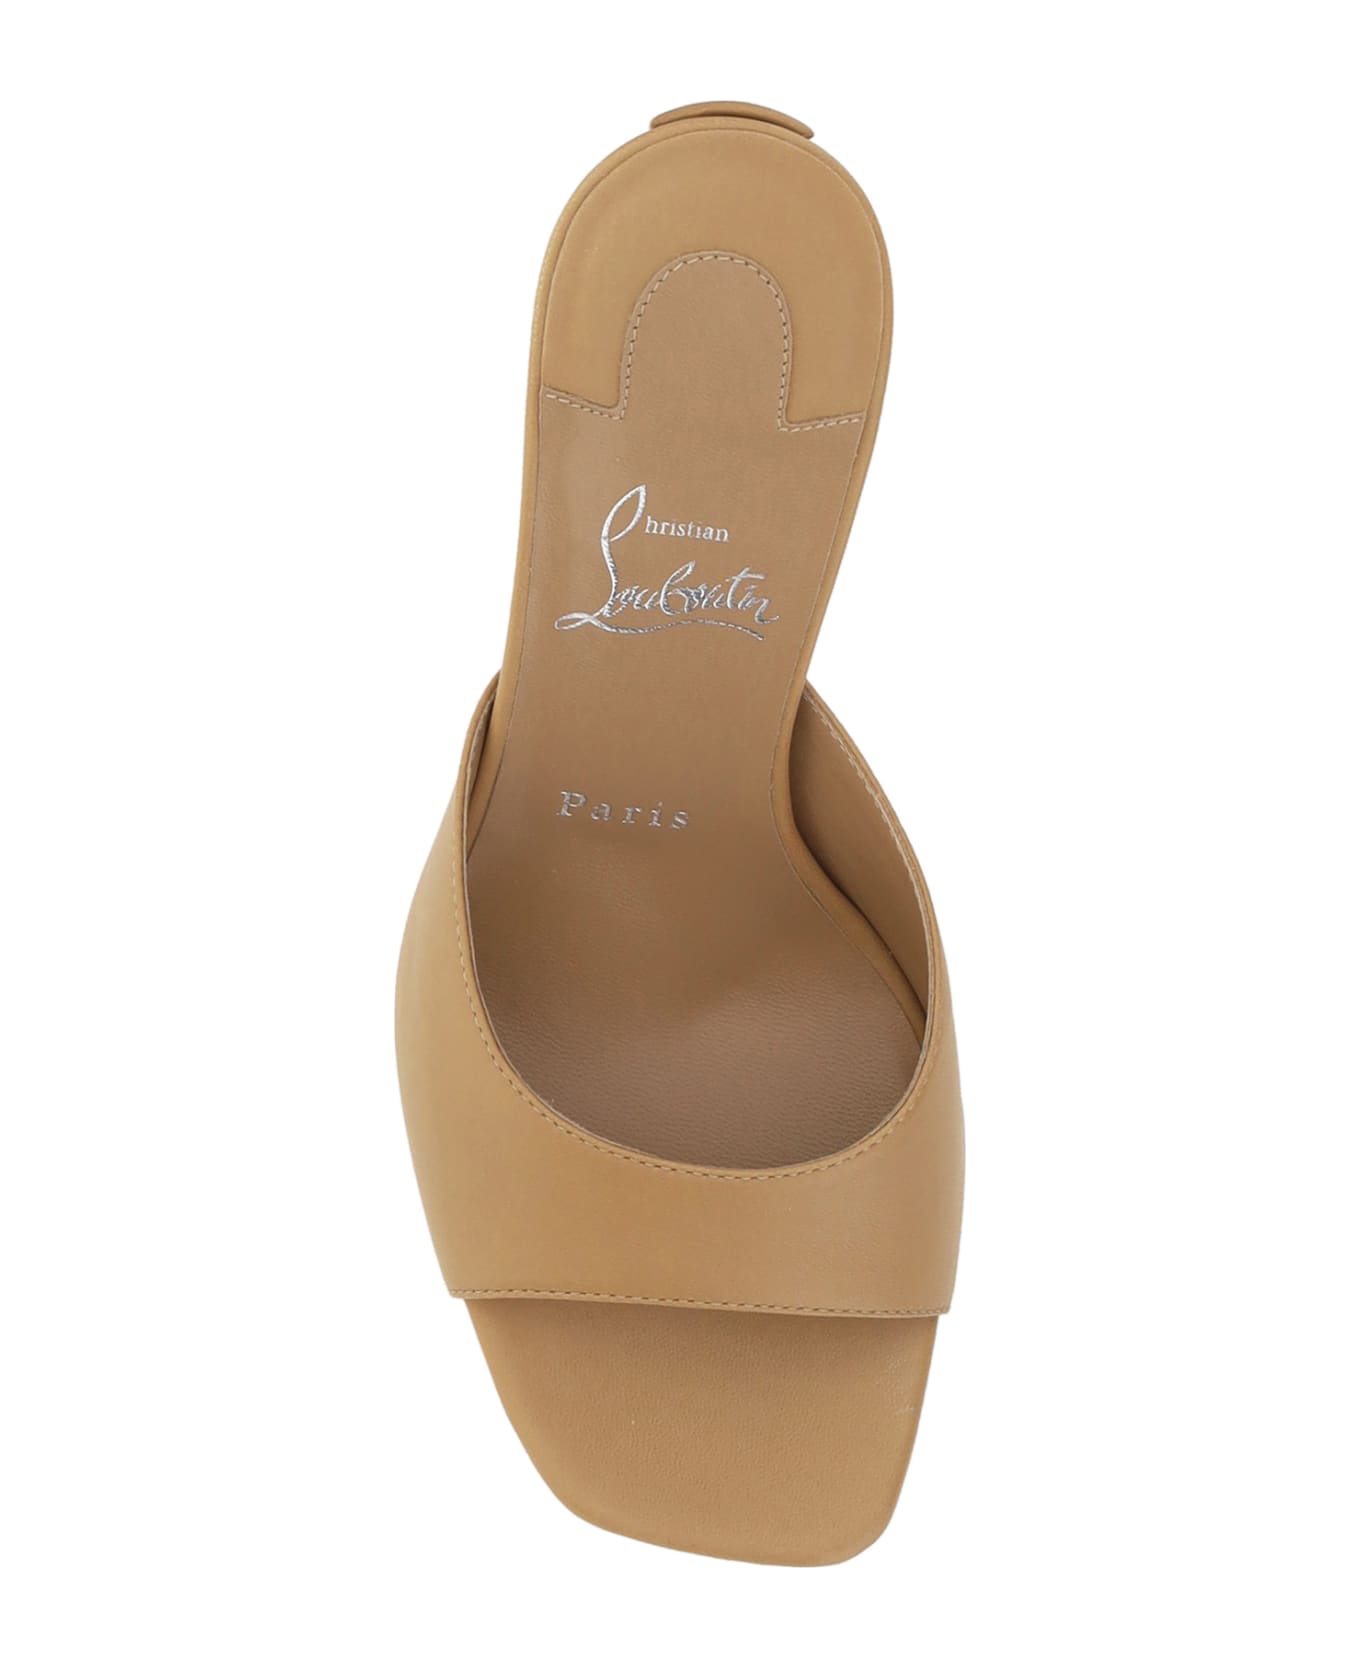 Christian Louboutin Condora Mule Sandals - Toffee/lin Toffee